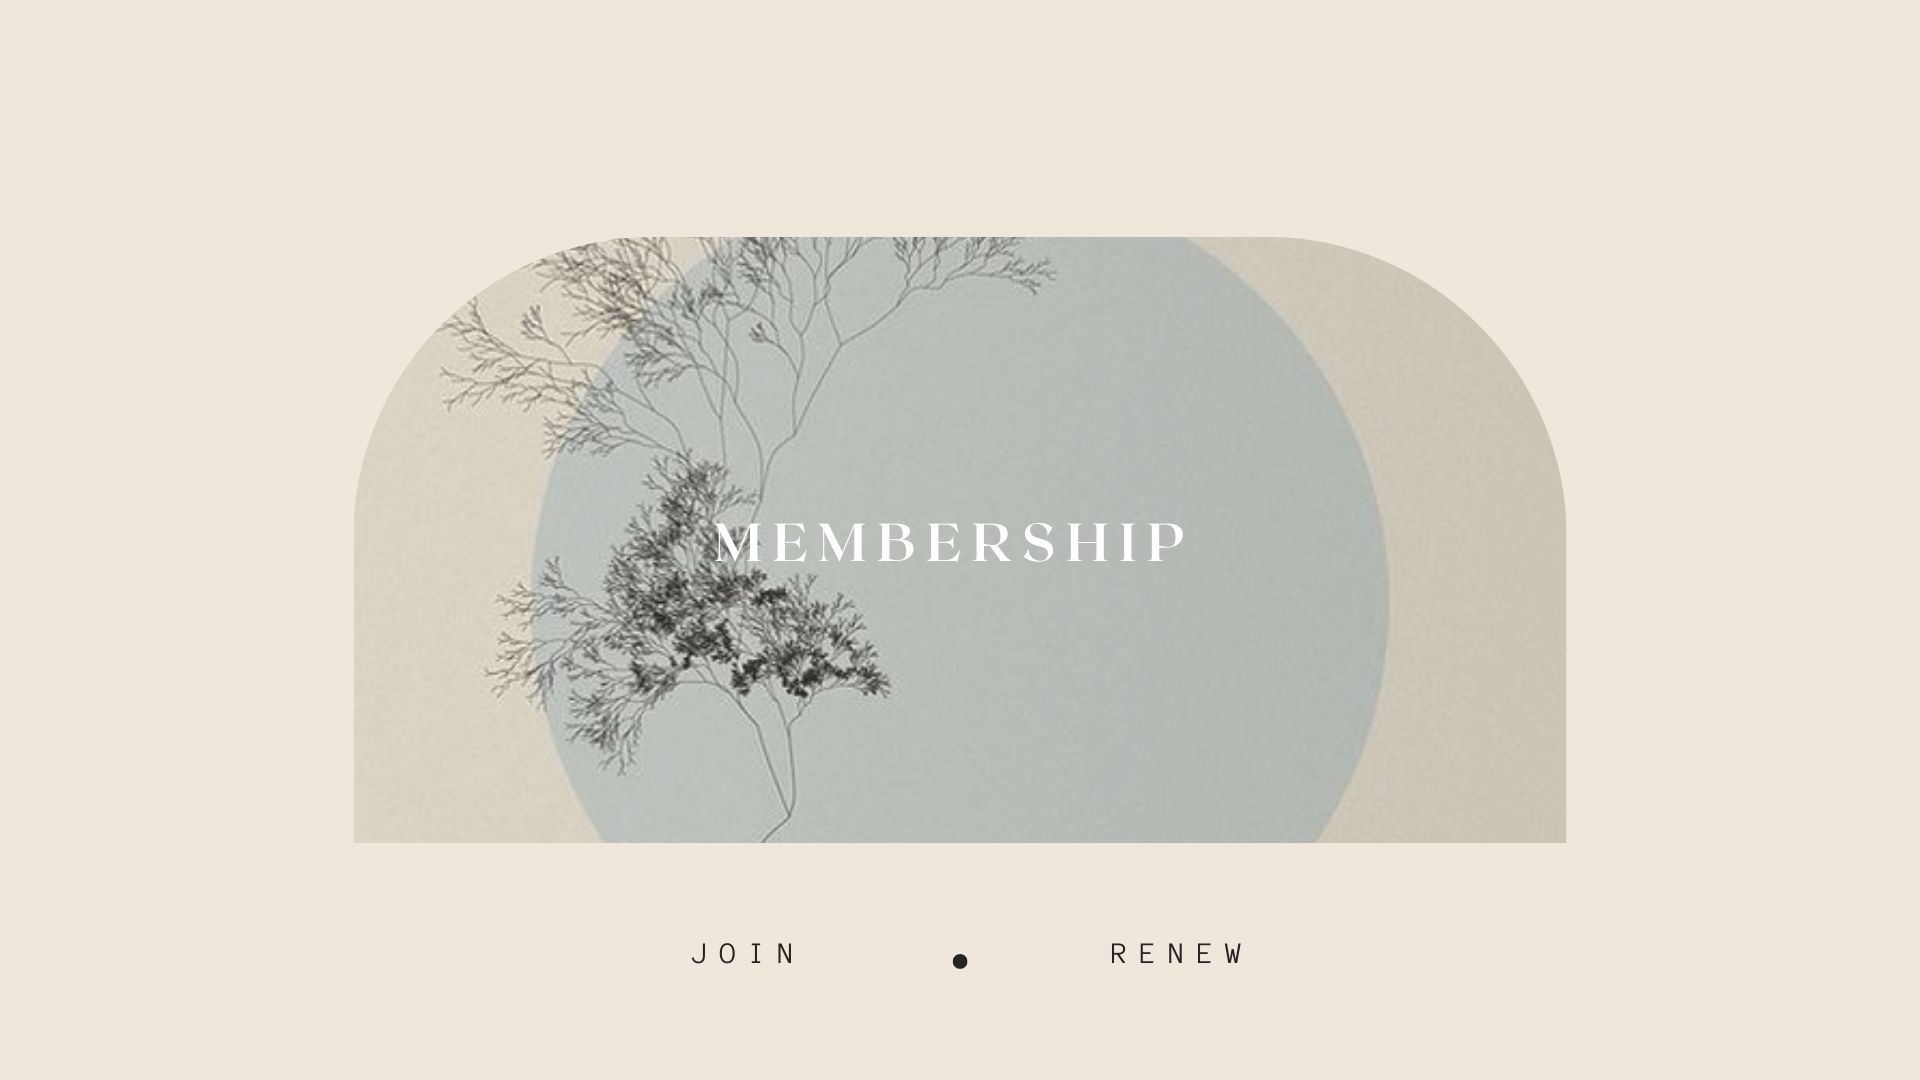 Membership.  Join. Renew. Image of abstract illustration.